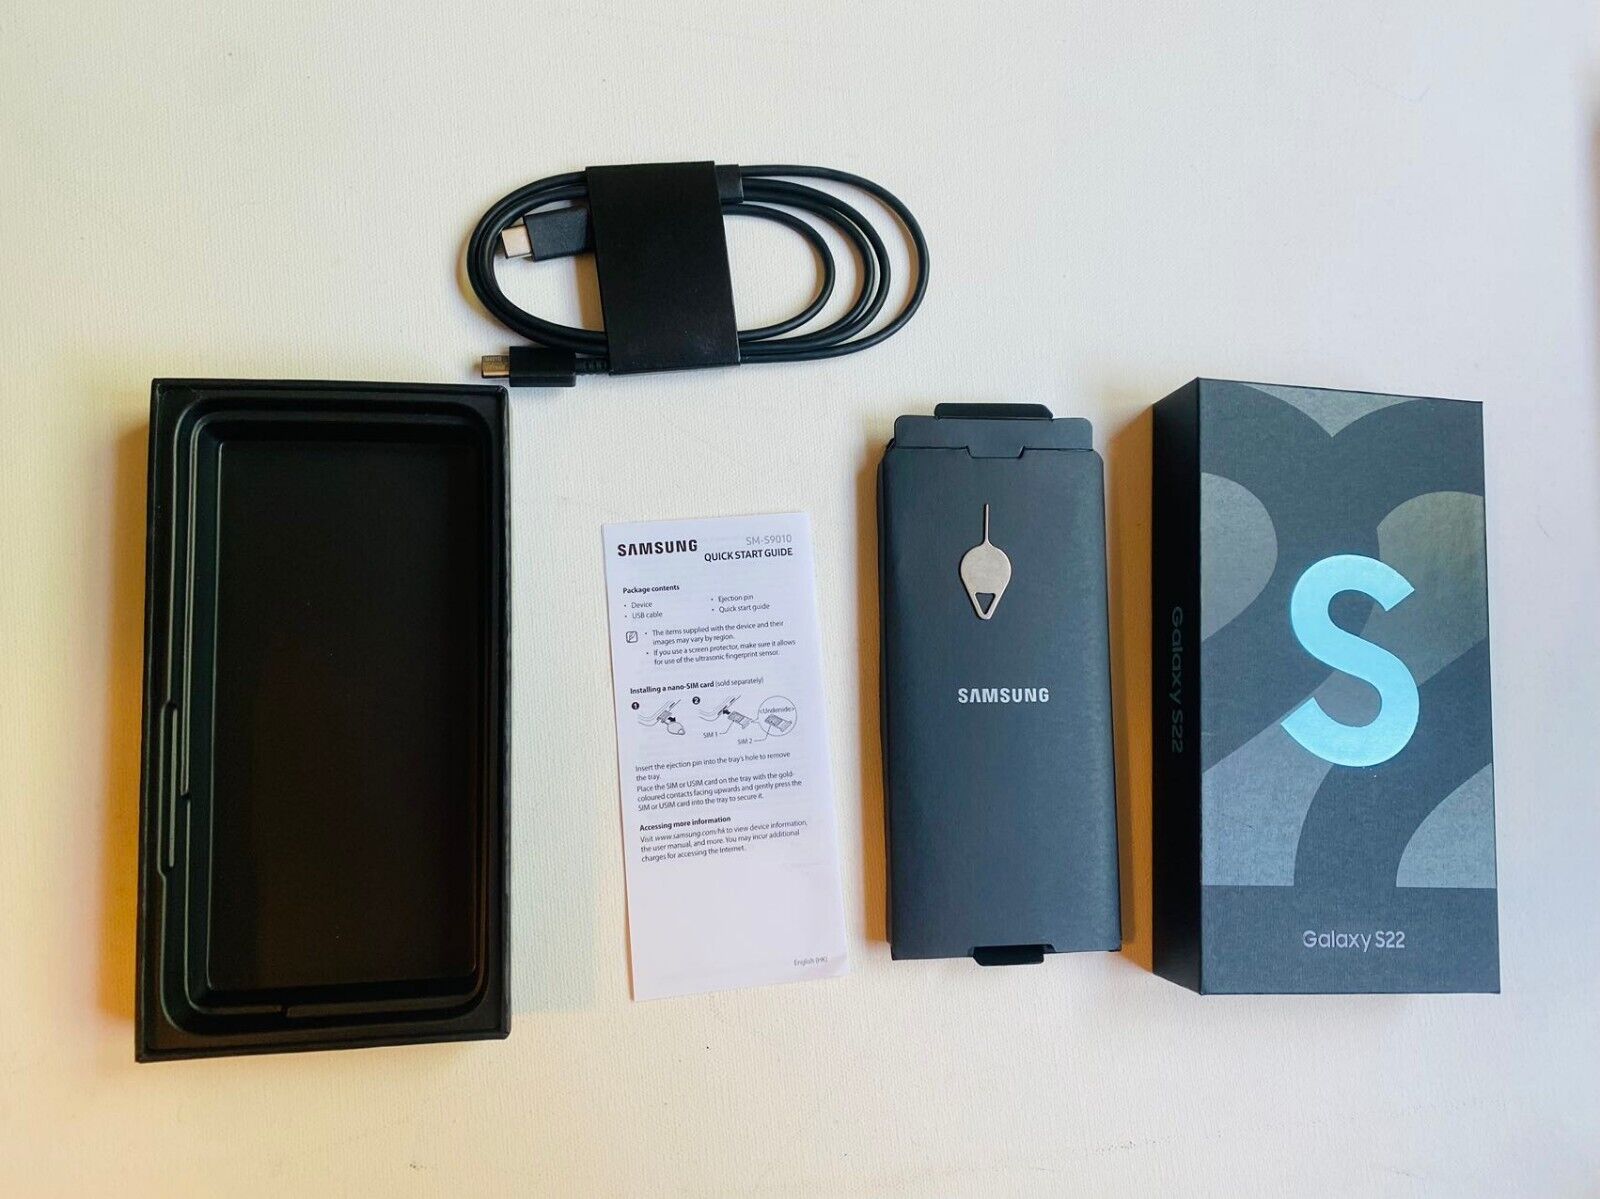 Samsung  Galaxy S22 box and all accessories